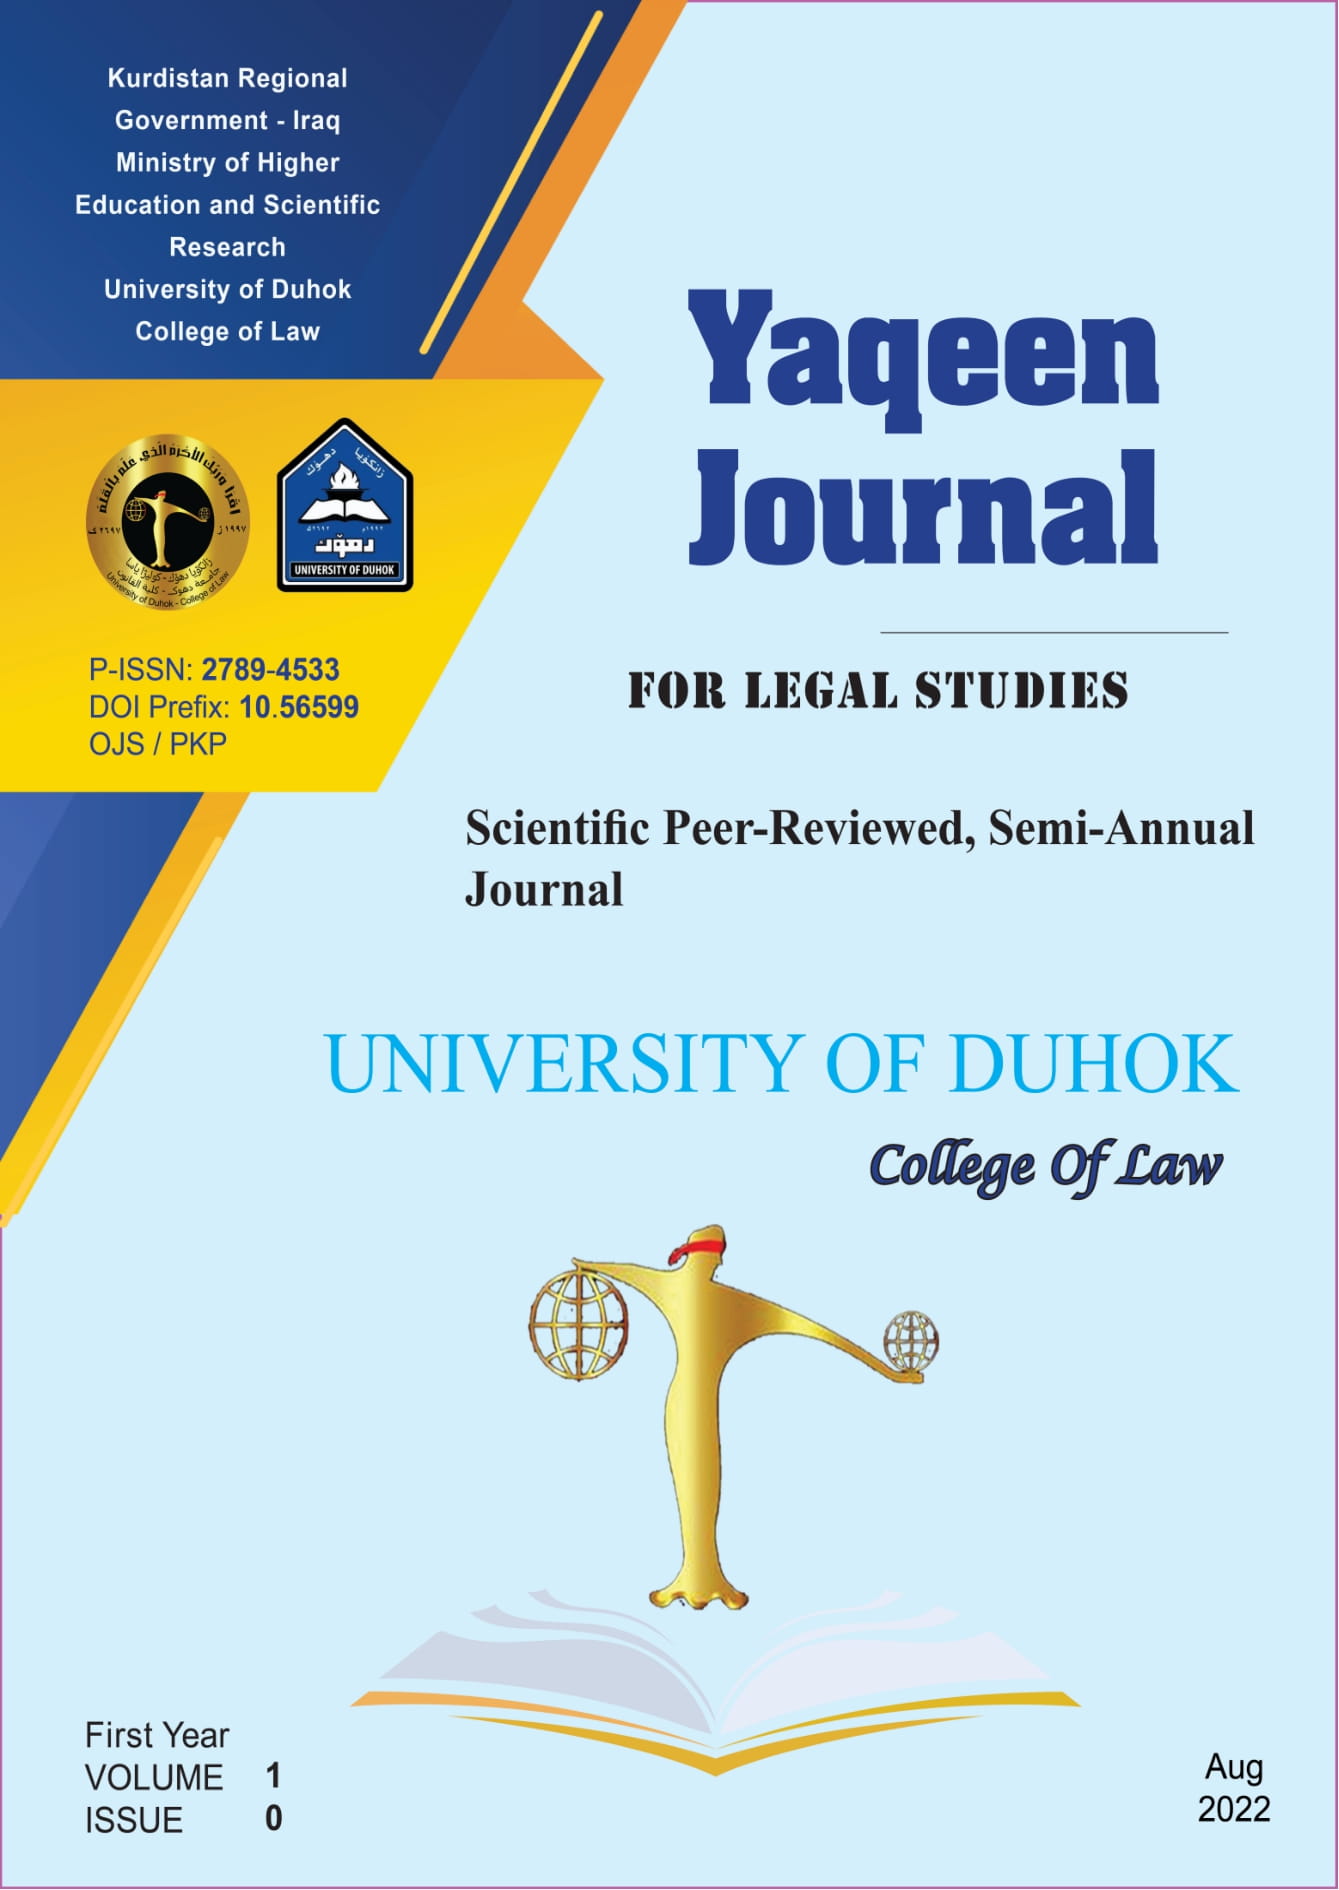 Yaqeen journal for legal studies